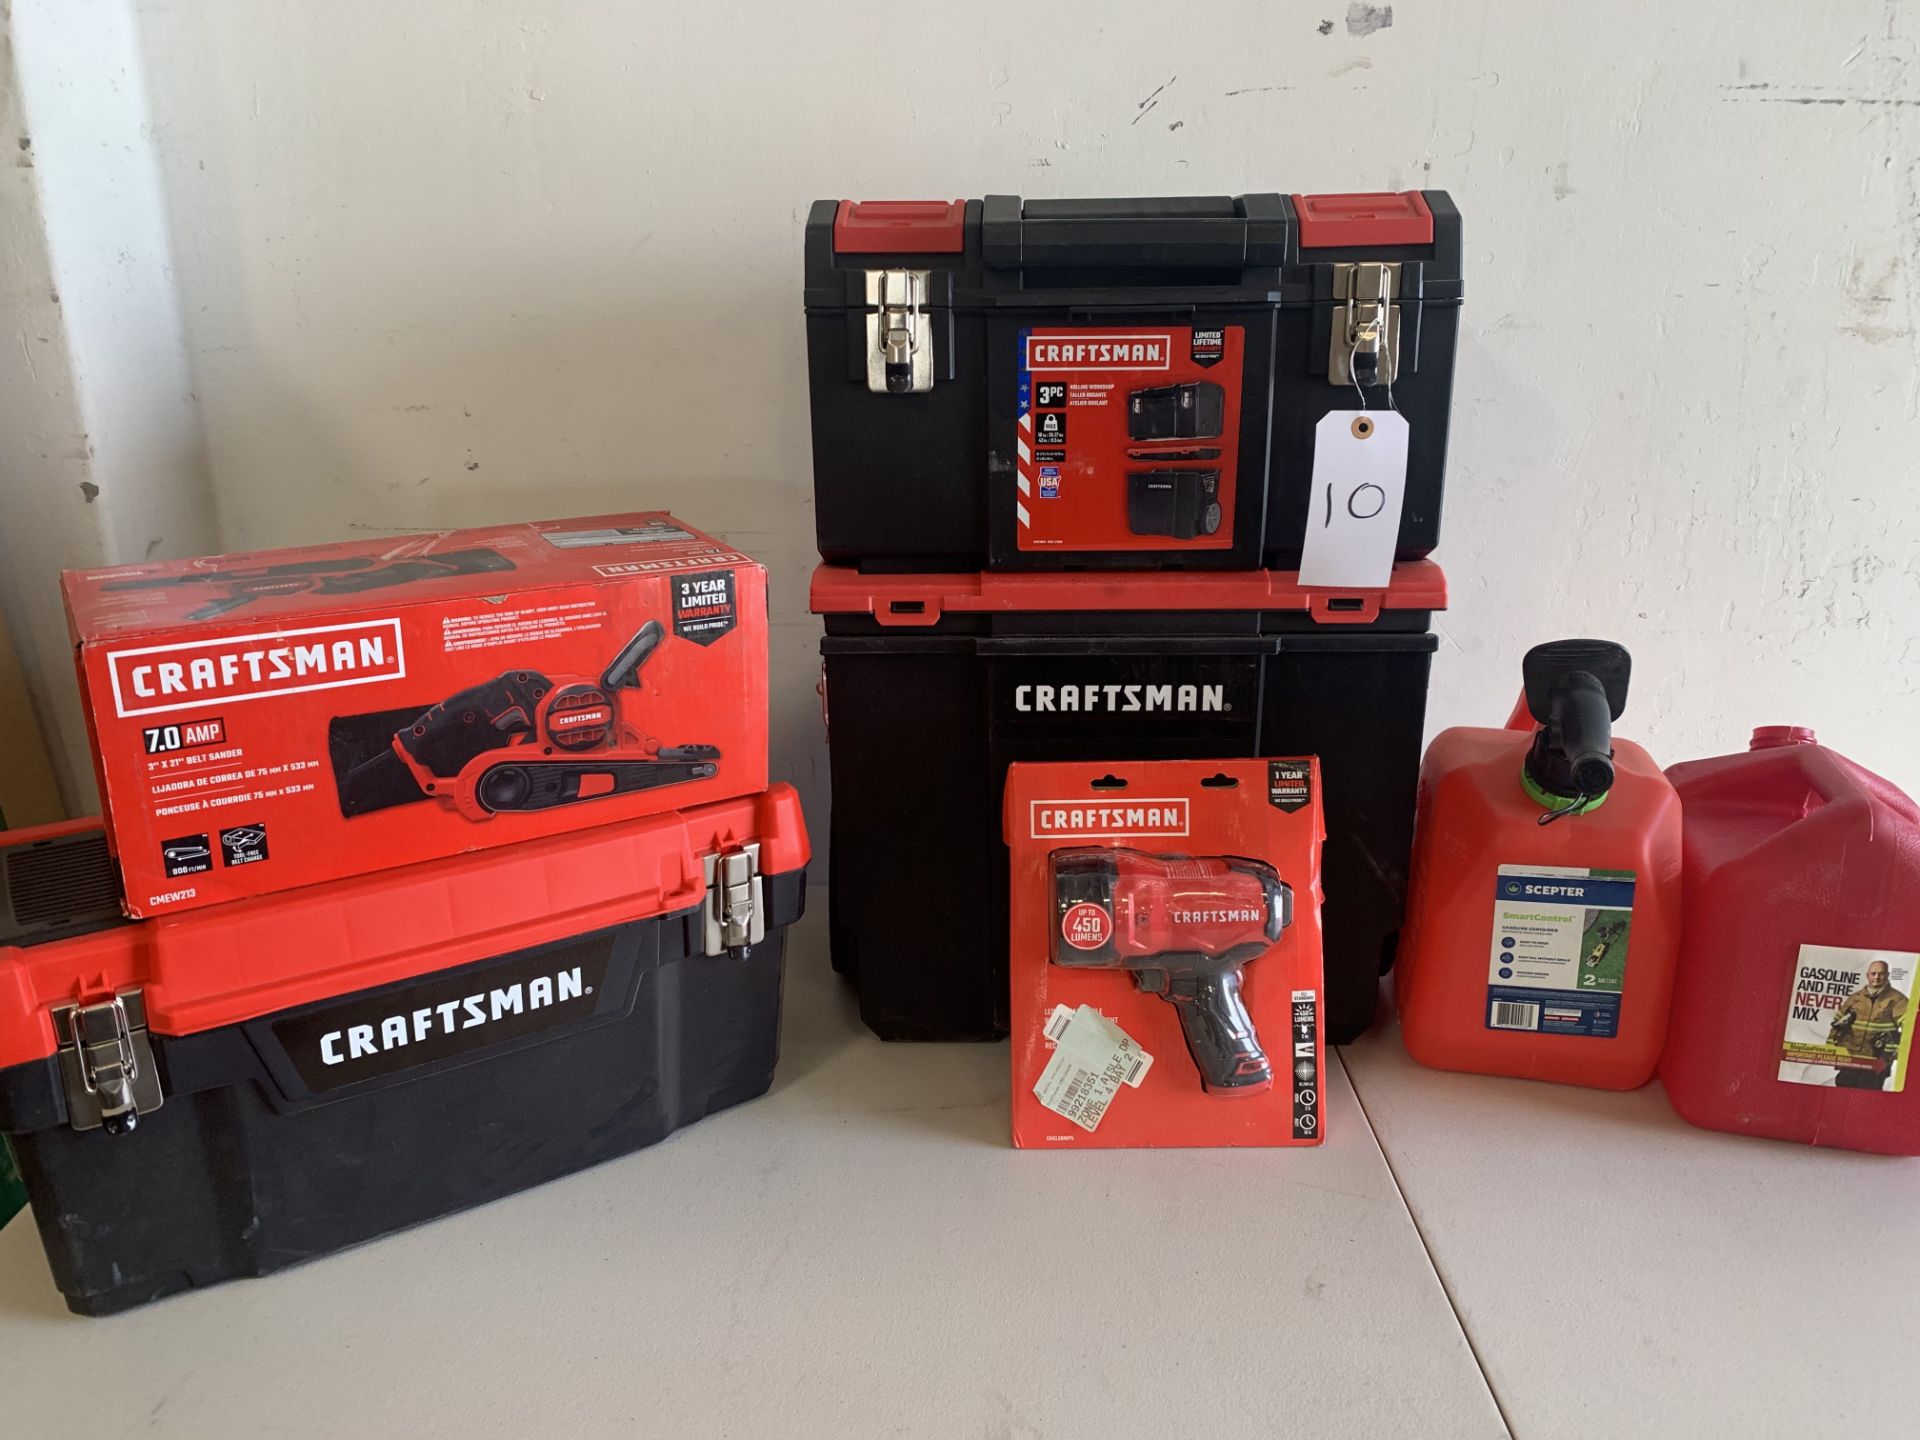 Craftsman Tools and Gas Cans, 7 Items